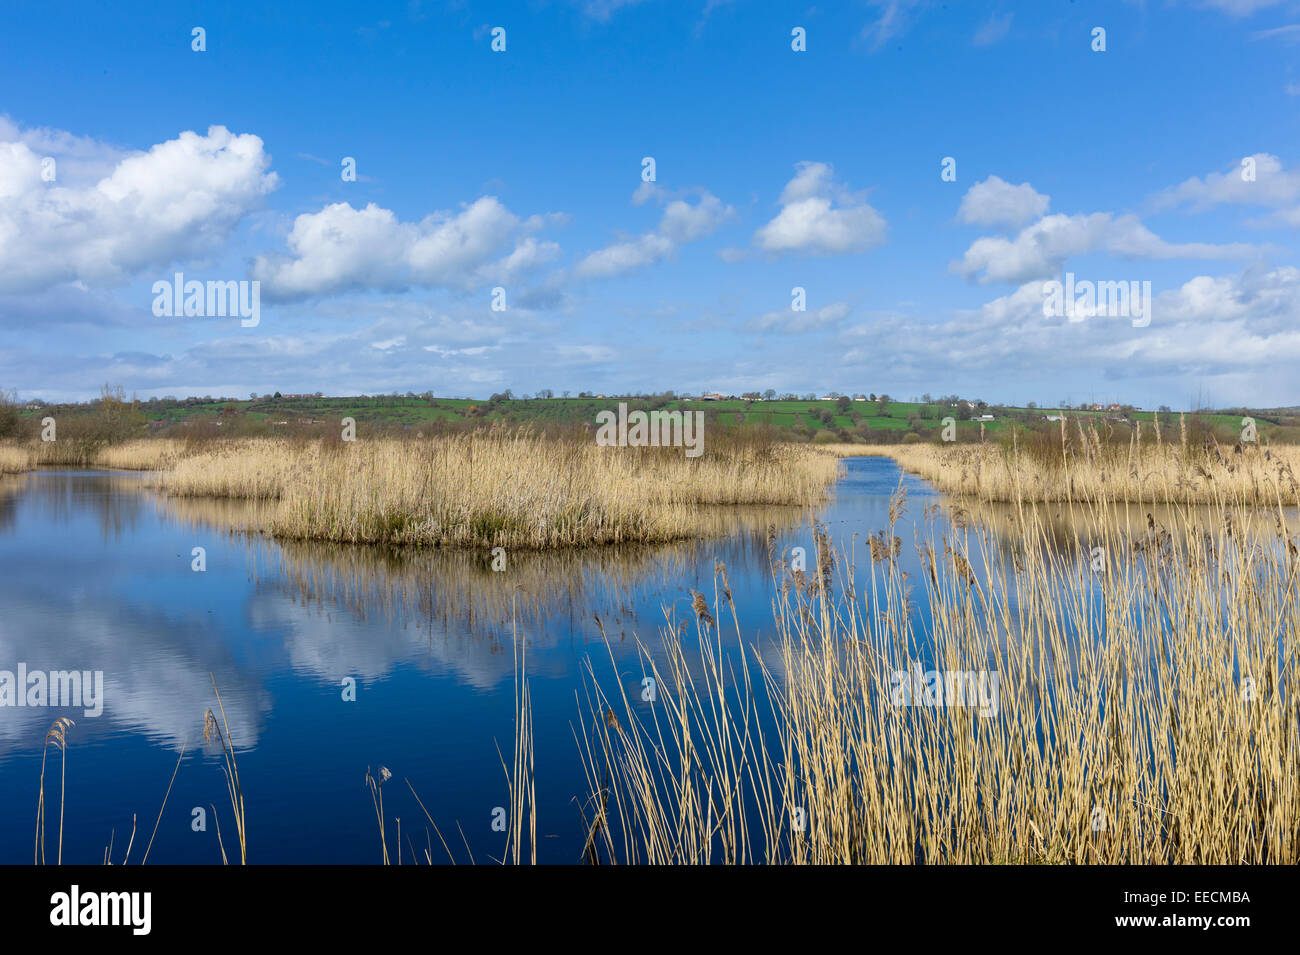 Puffy clouds as reflection in the water, reedbed and marshes in The Somerset Levels Nature Reserve in Southern England, UK Stock Photo